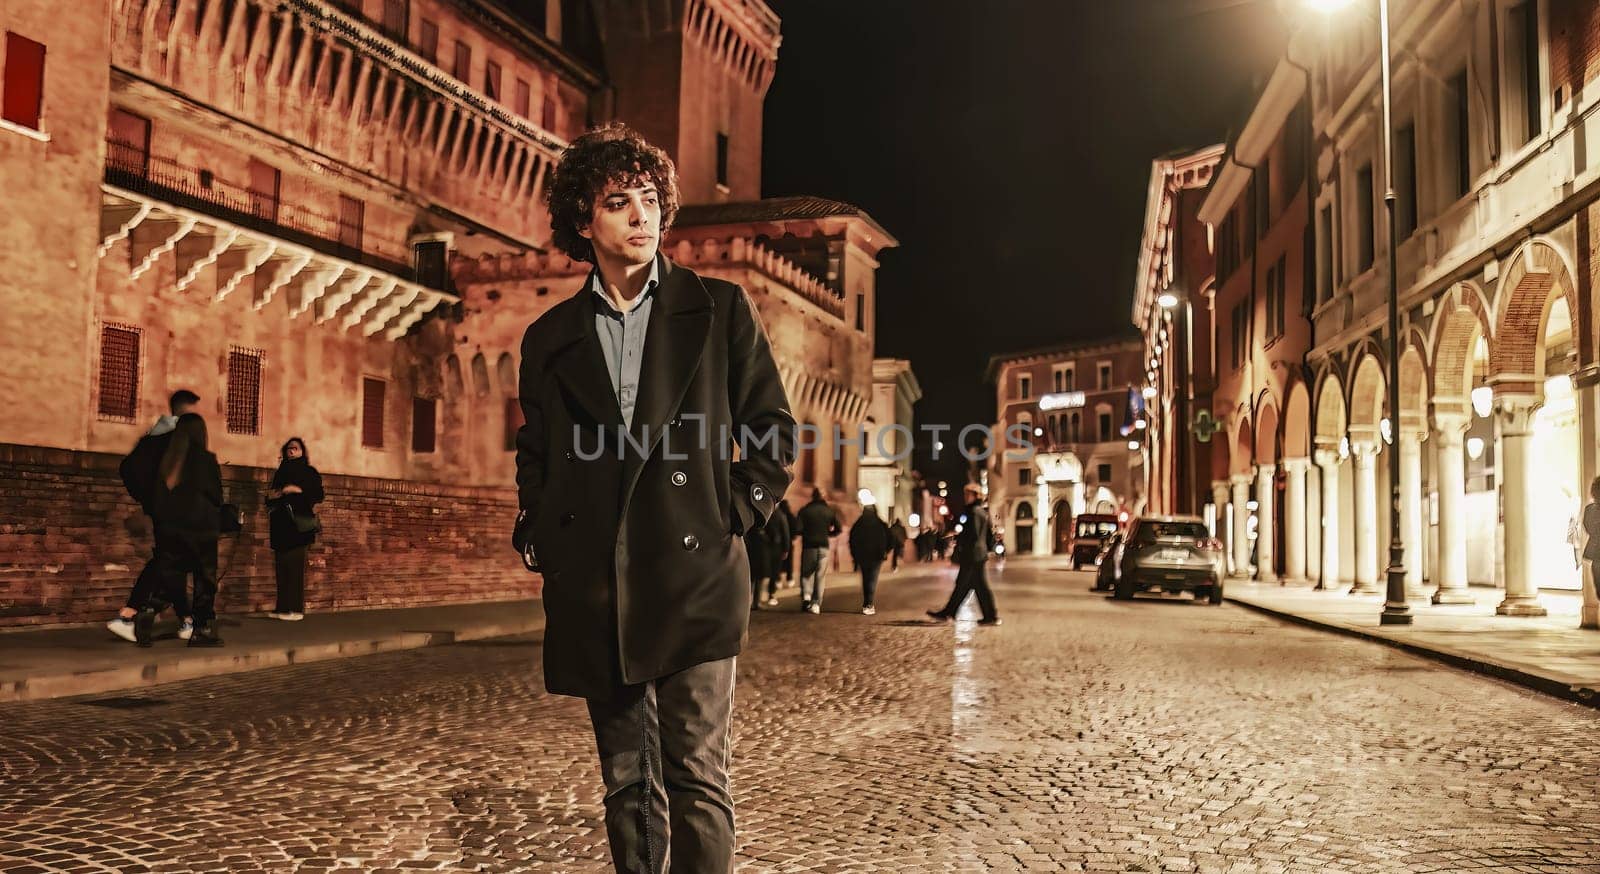 A young man is walking alone in an urban setting at night, with dark shadows and the bright lights of the city creating a dramatic atmosphere.